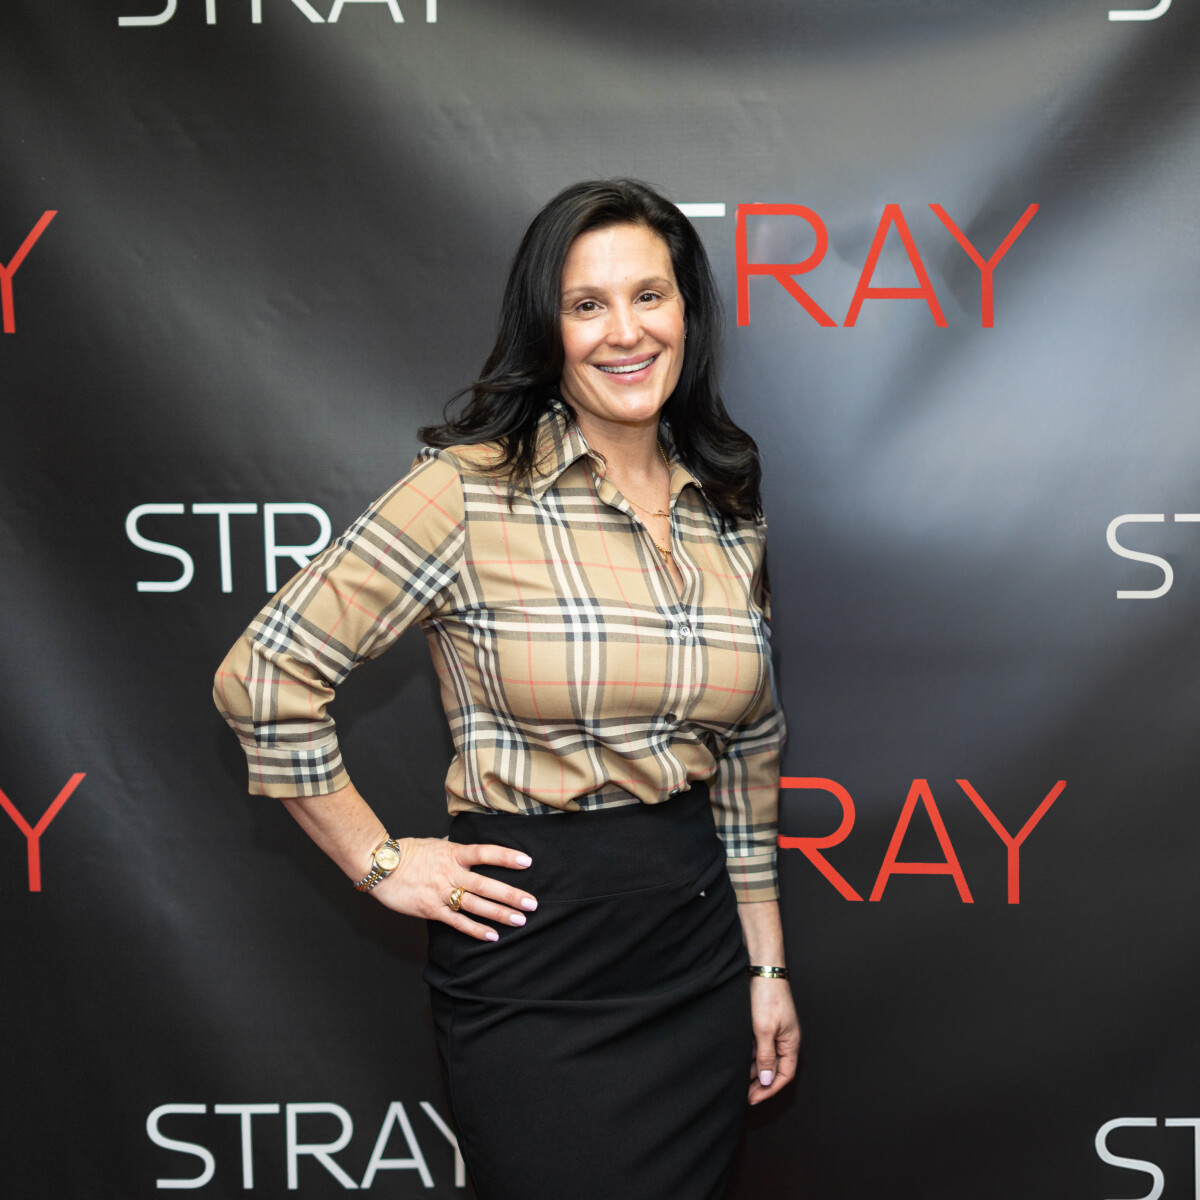 author Stacey caputi liakos posing at stray movie announcement event